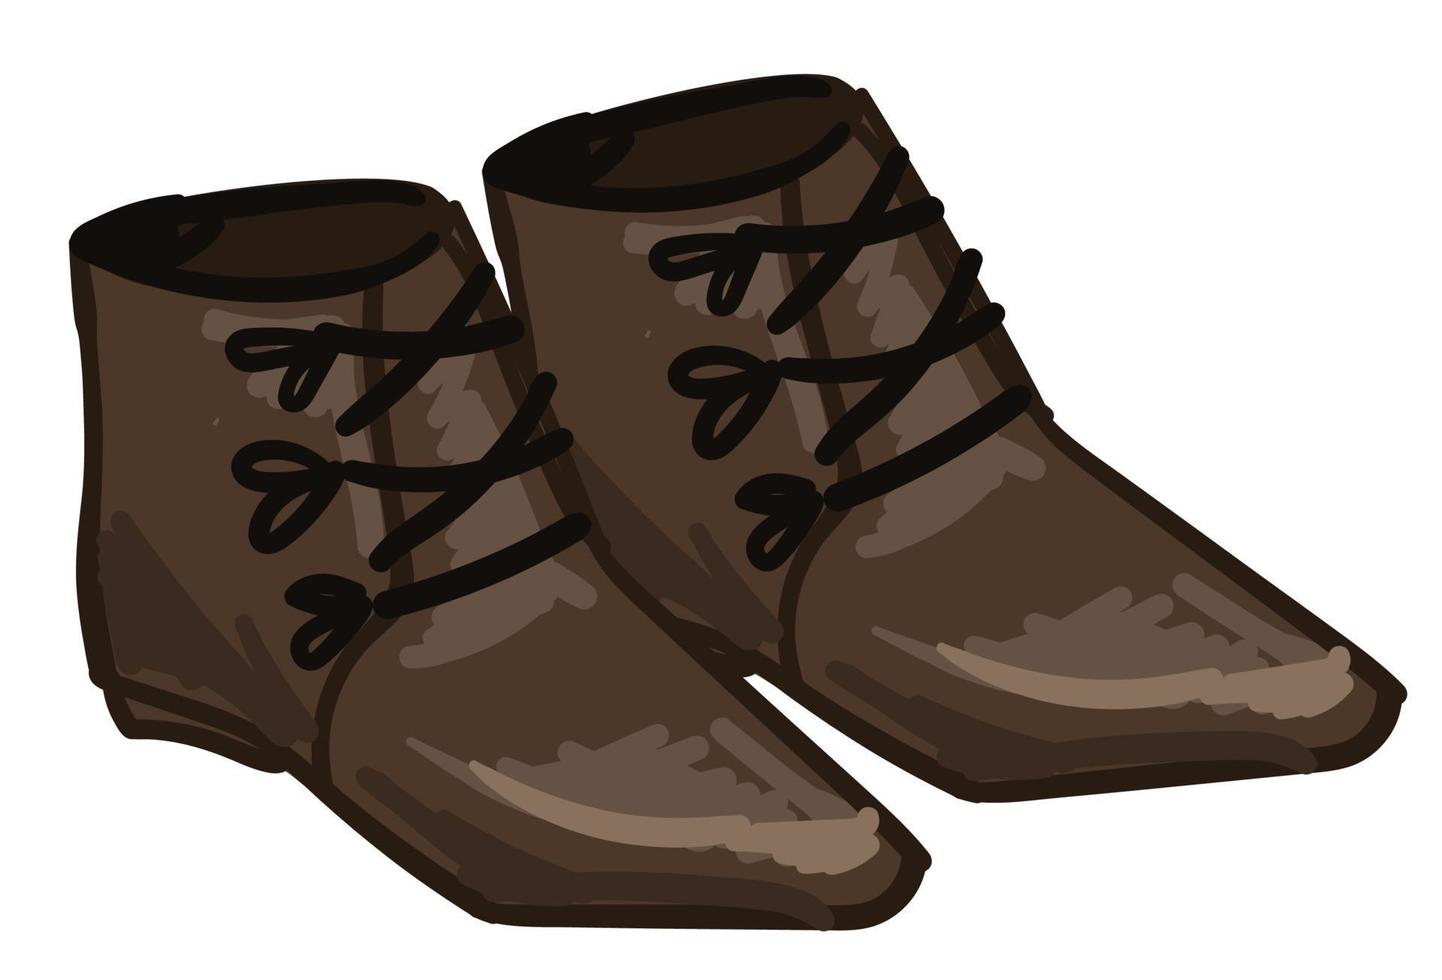 Old ancient boots with leather and laces vector